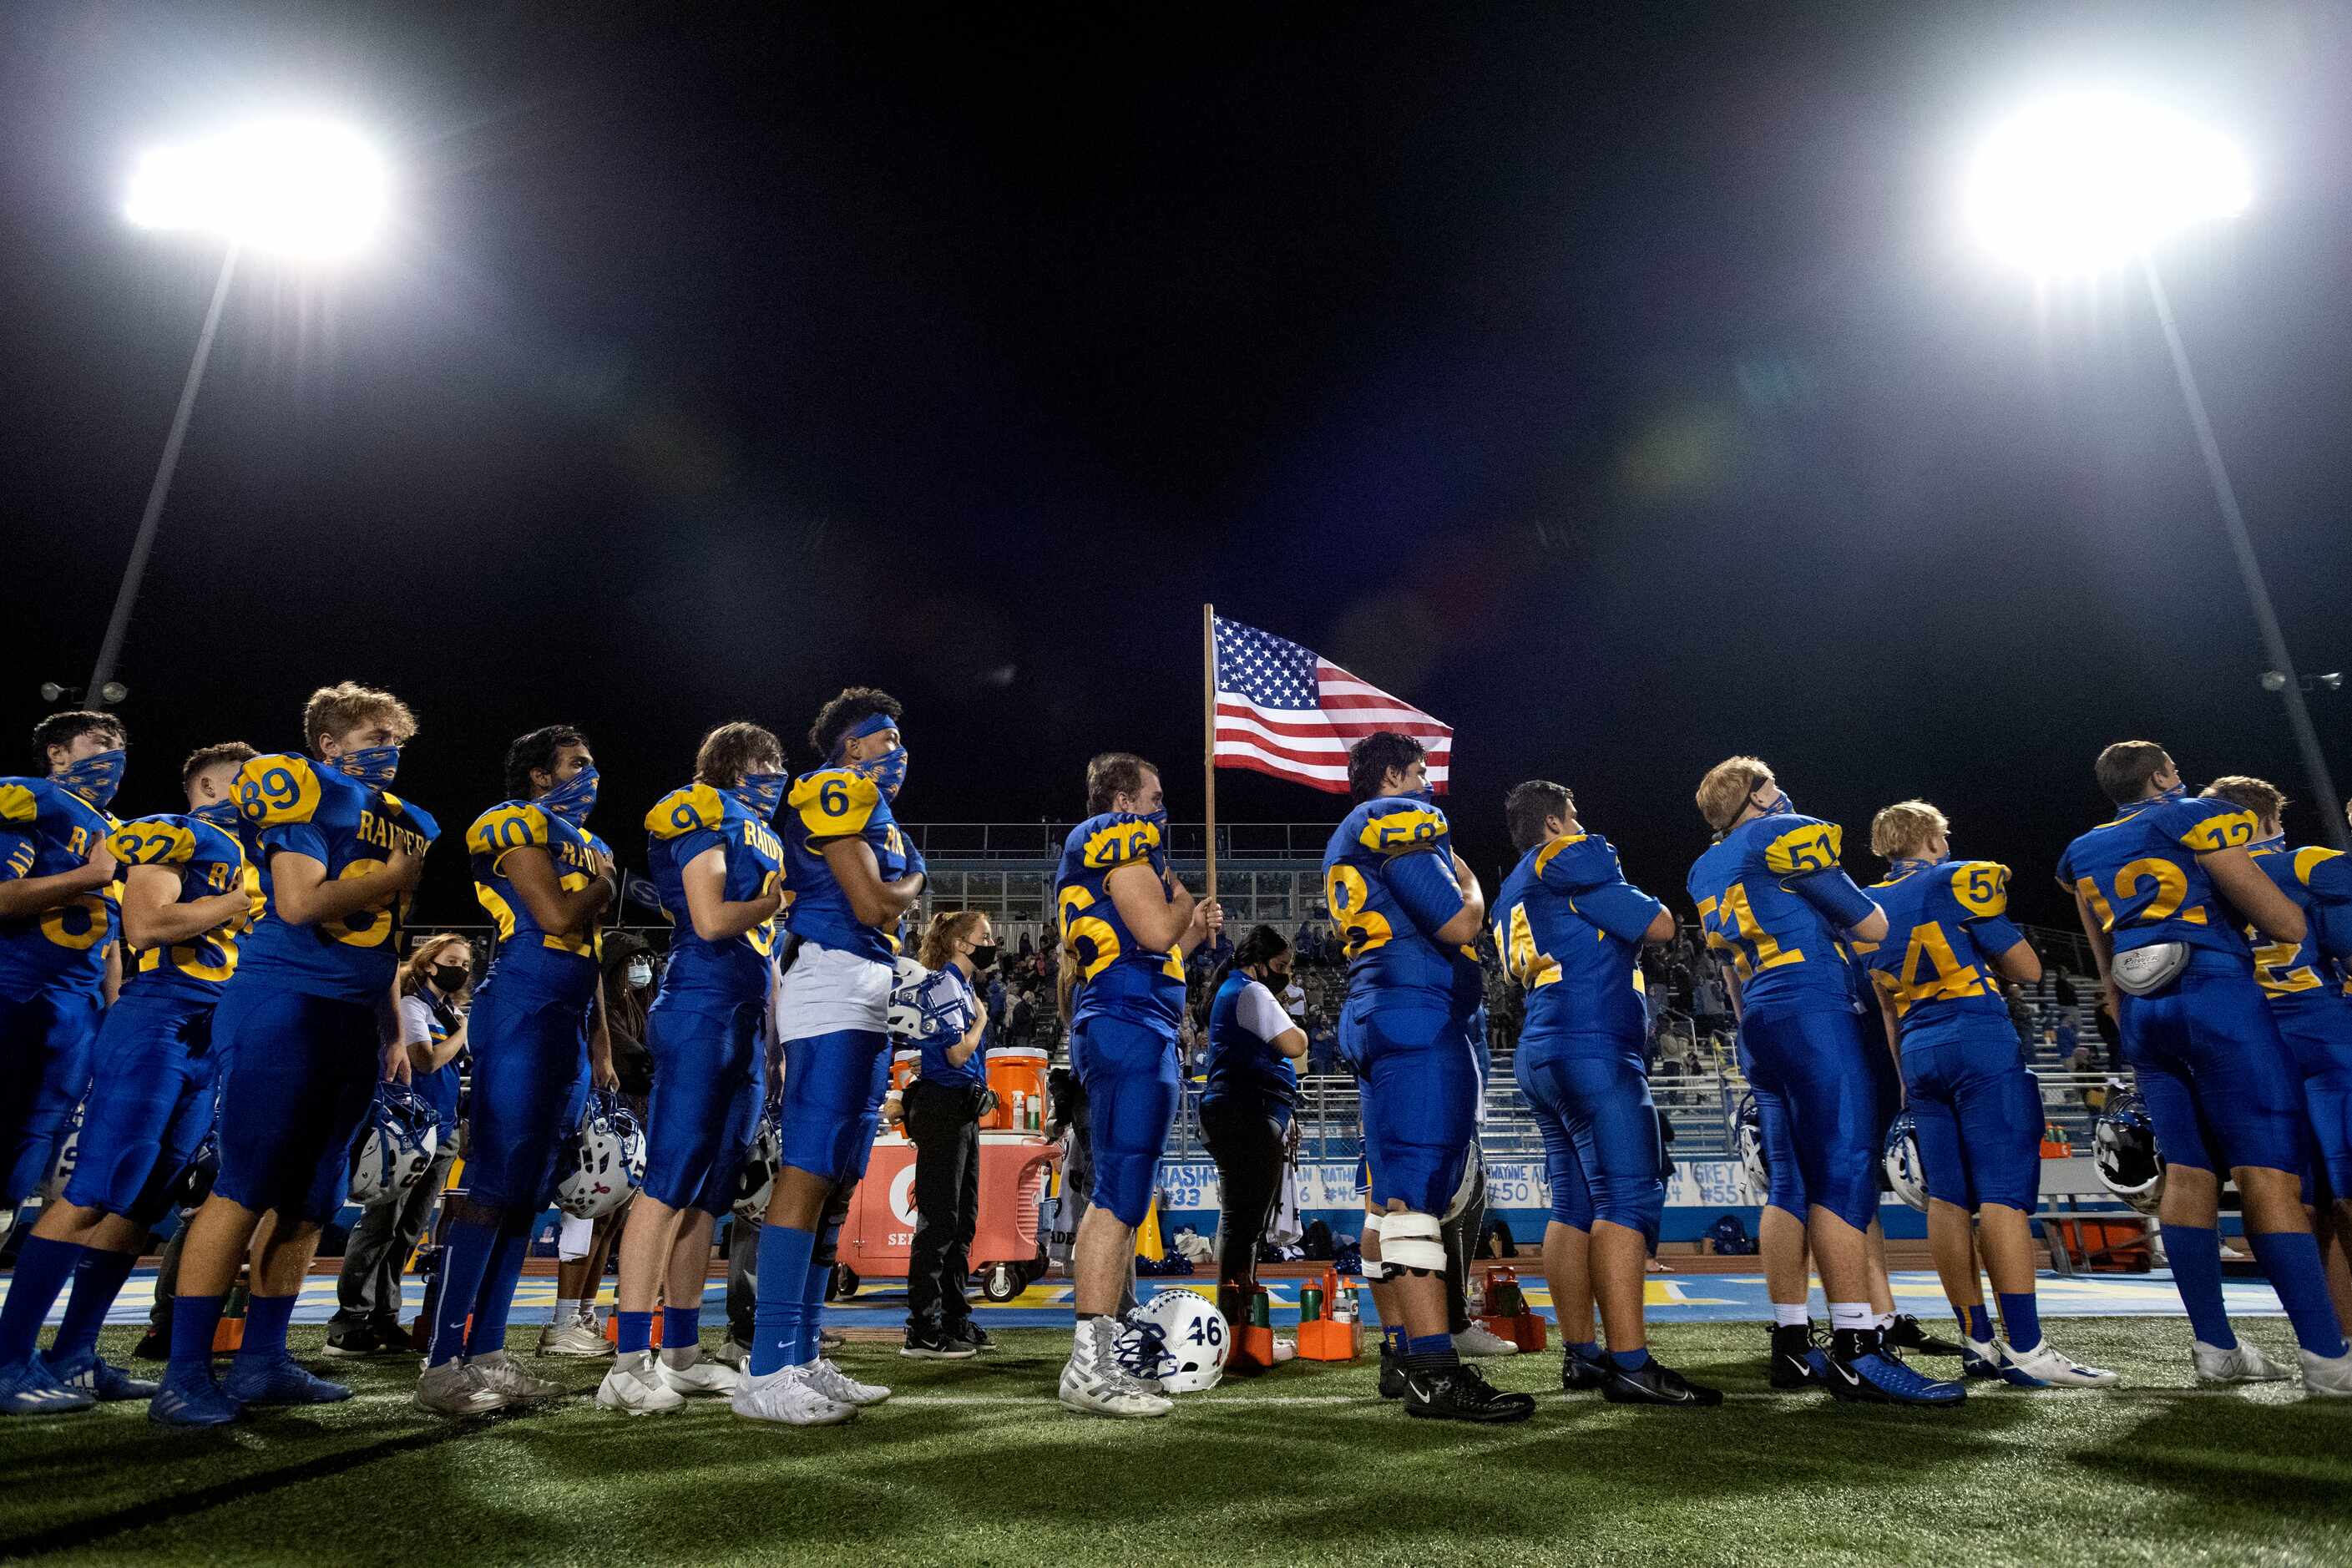 The Sunnyvale Raiders stand for the national anthem before a high school football game...